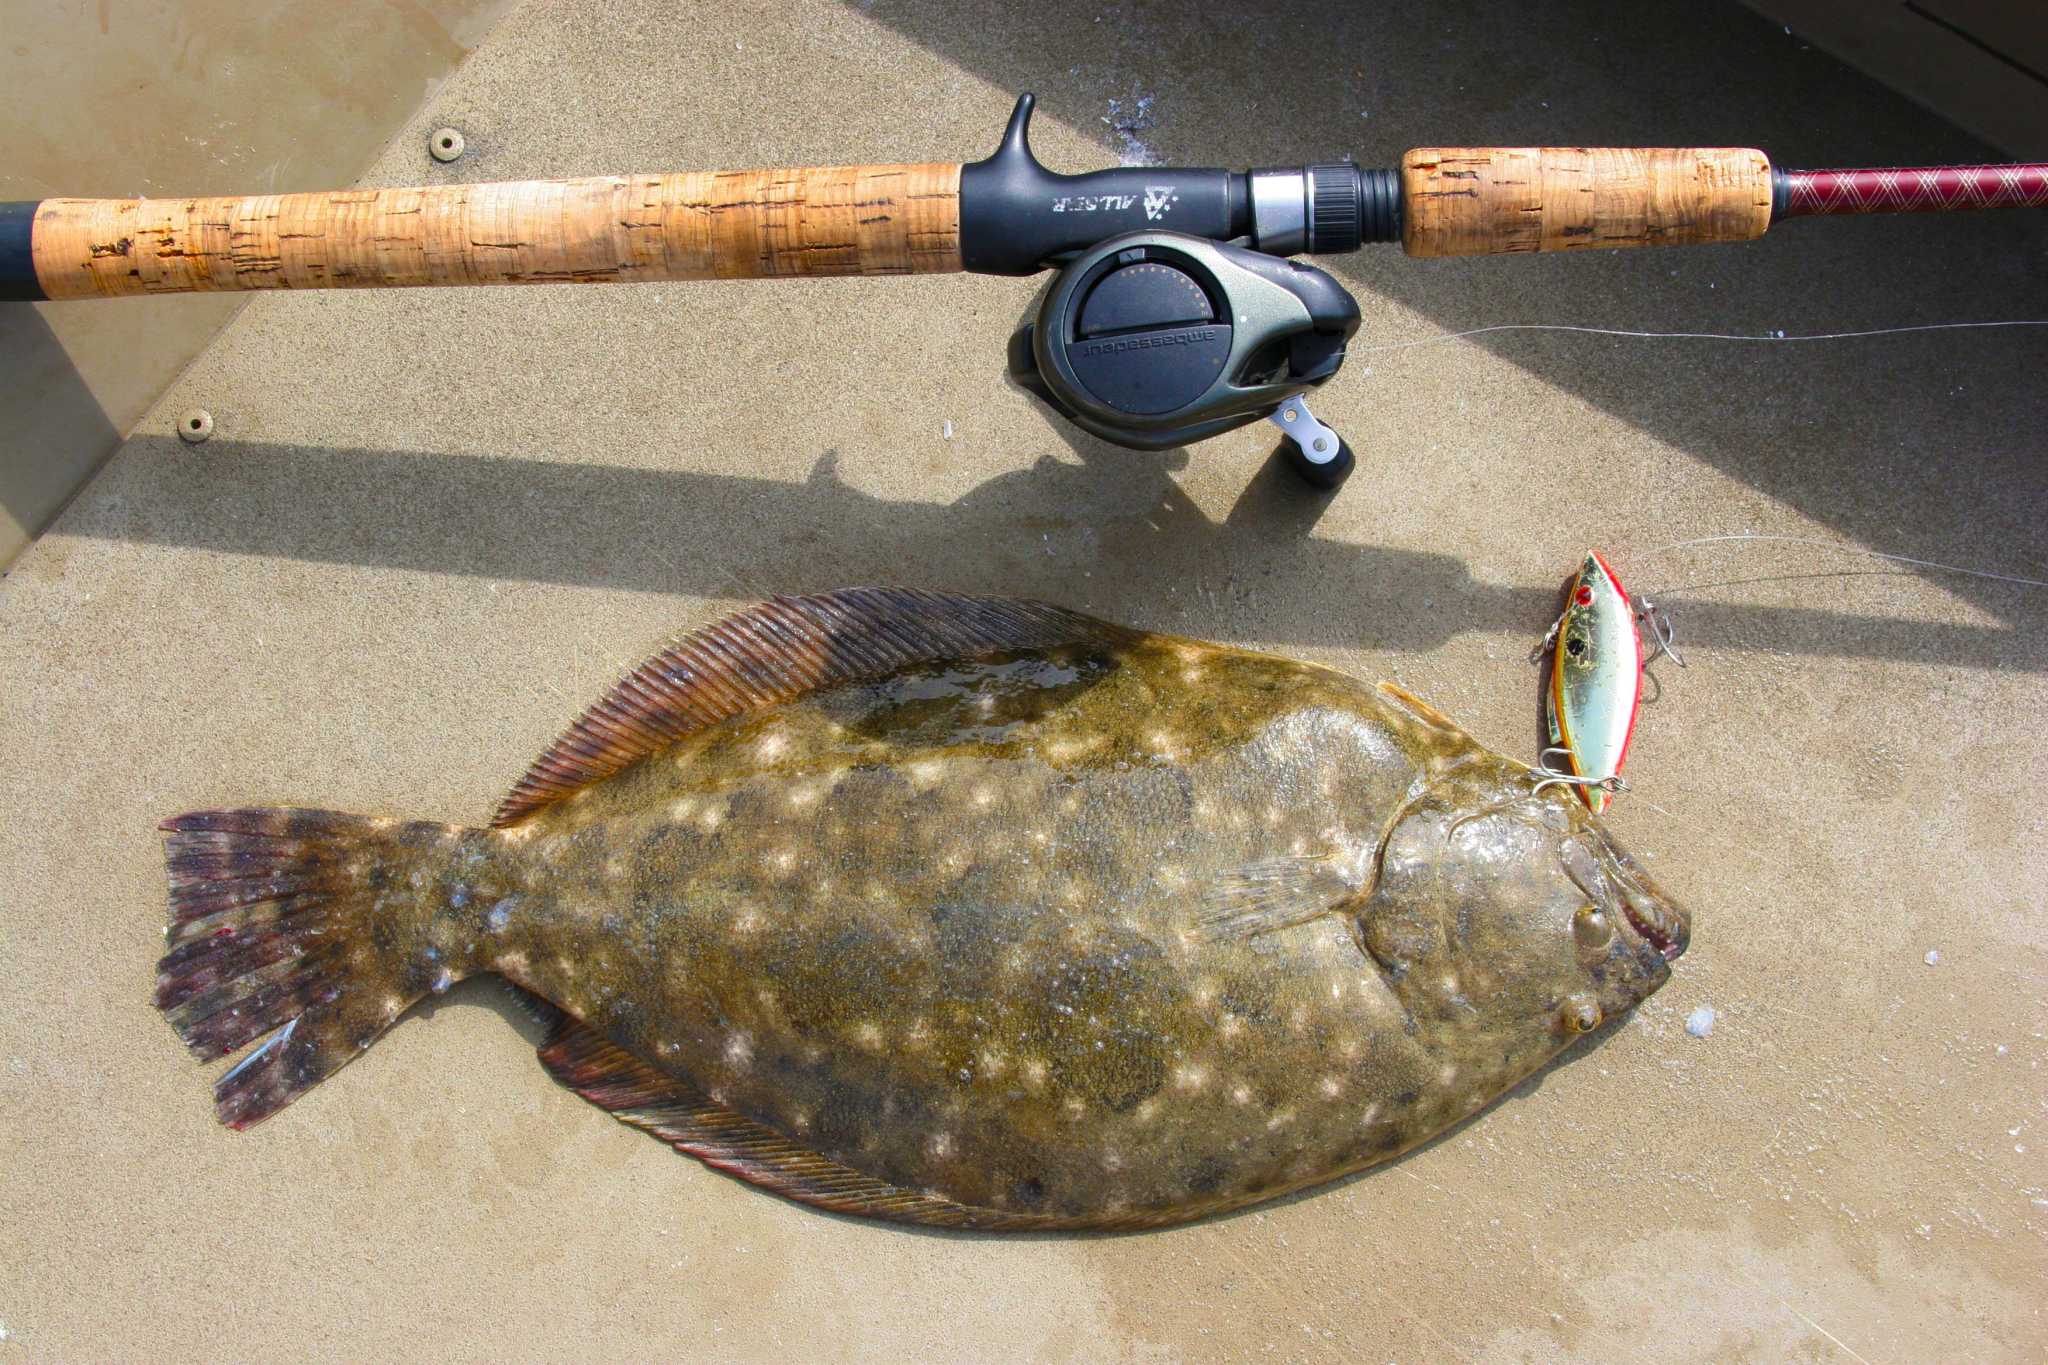 Texas flounder regulations approved; season closure delayed a year